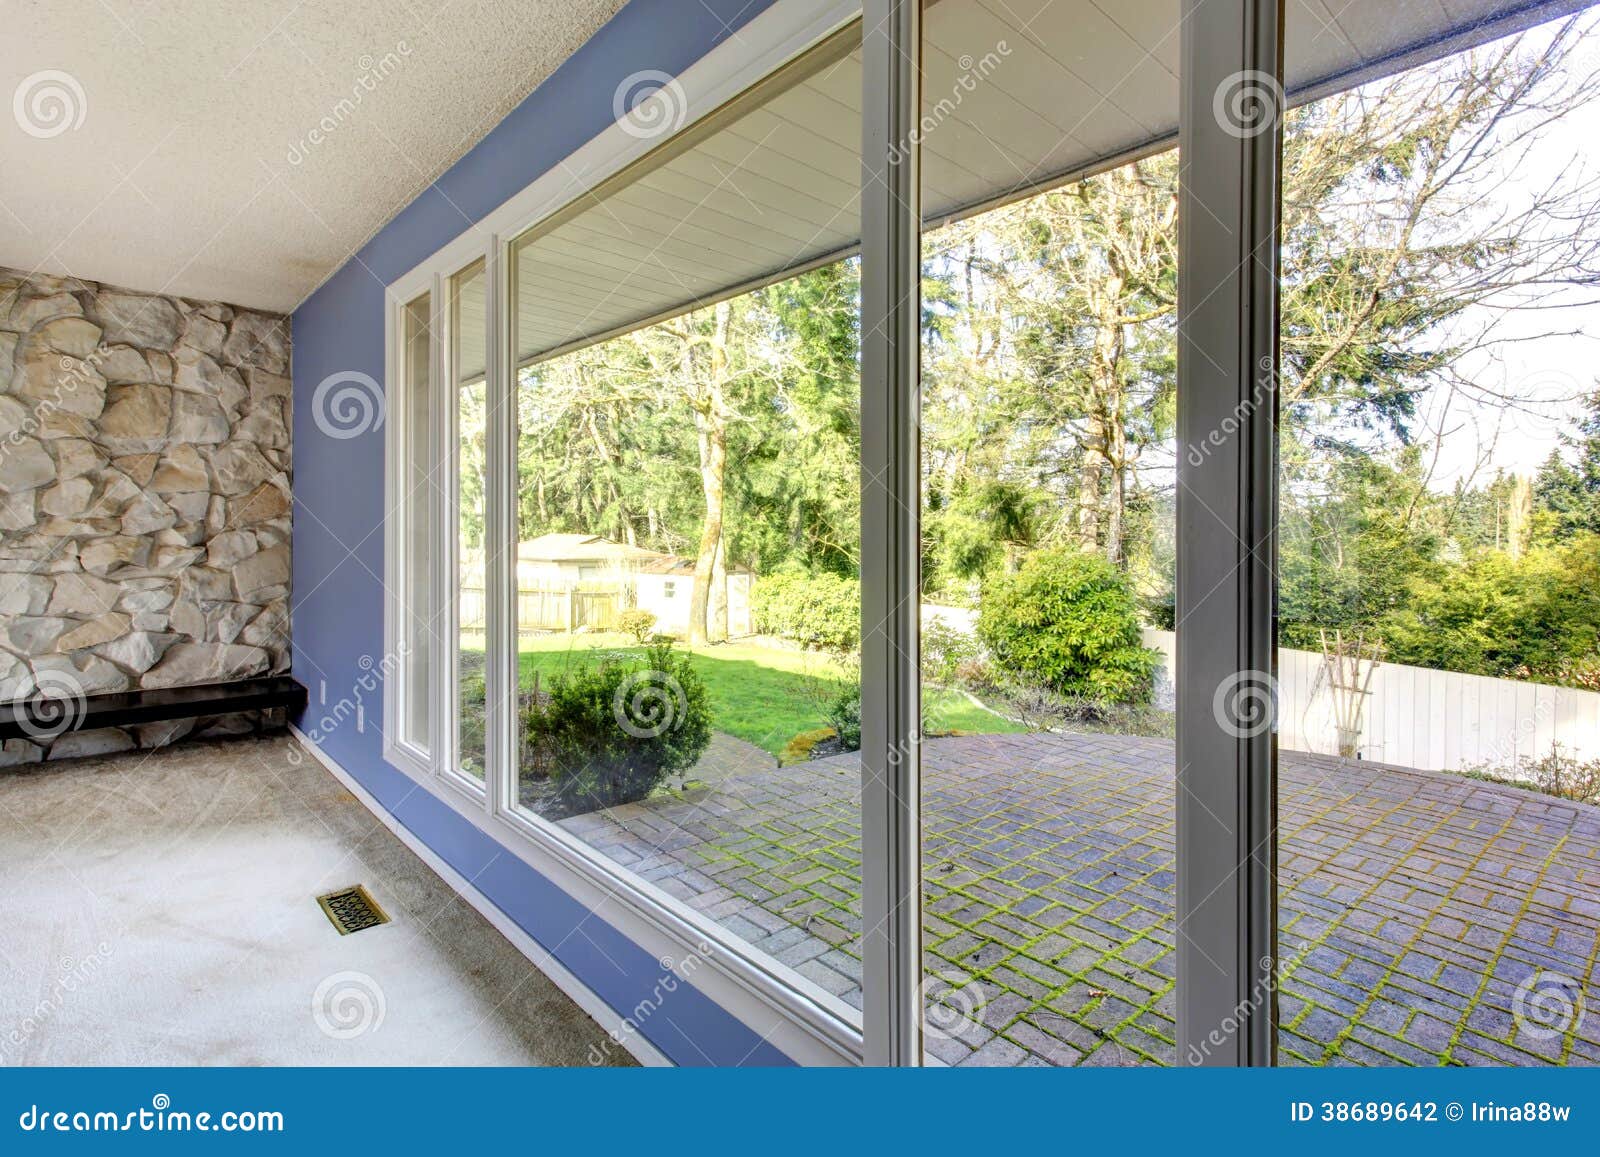 1 659 Window View Backyard Photos Free Royalty Free Stock Photos From Dreamstime